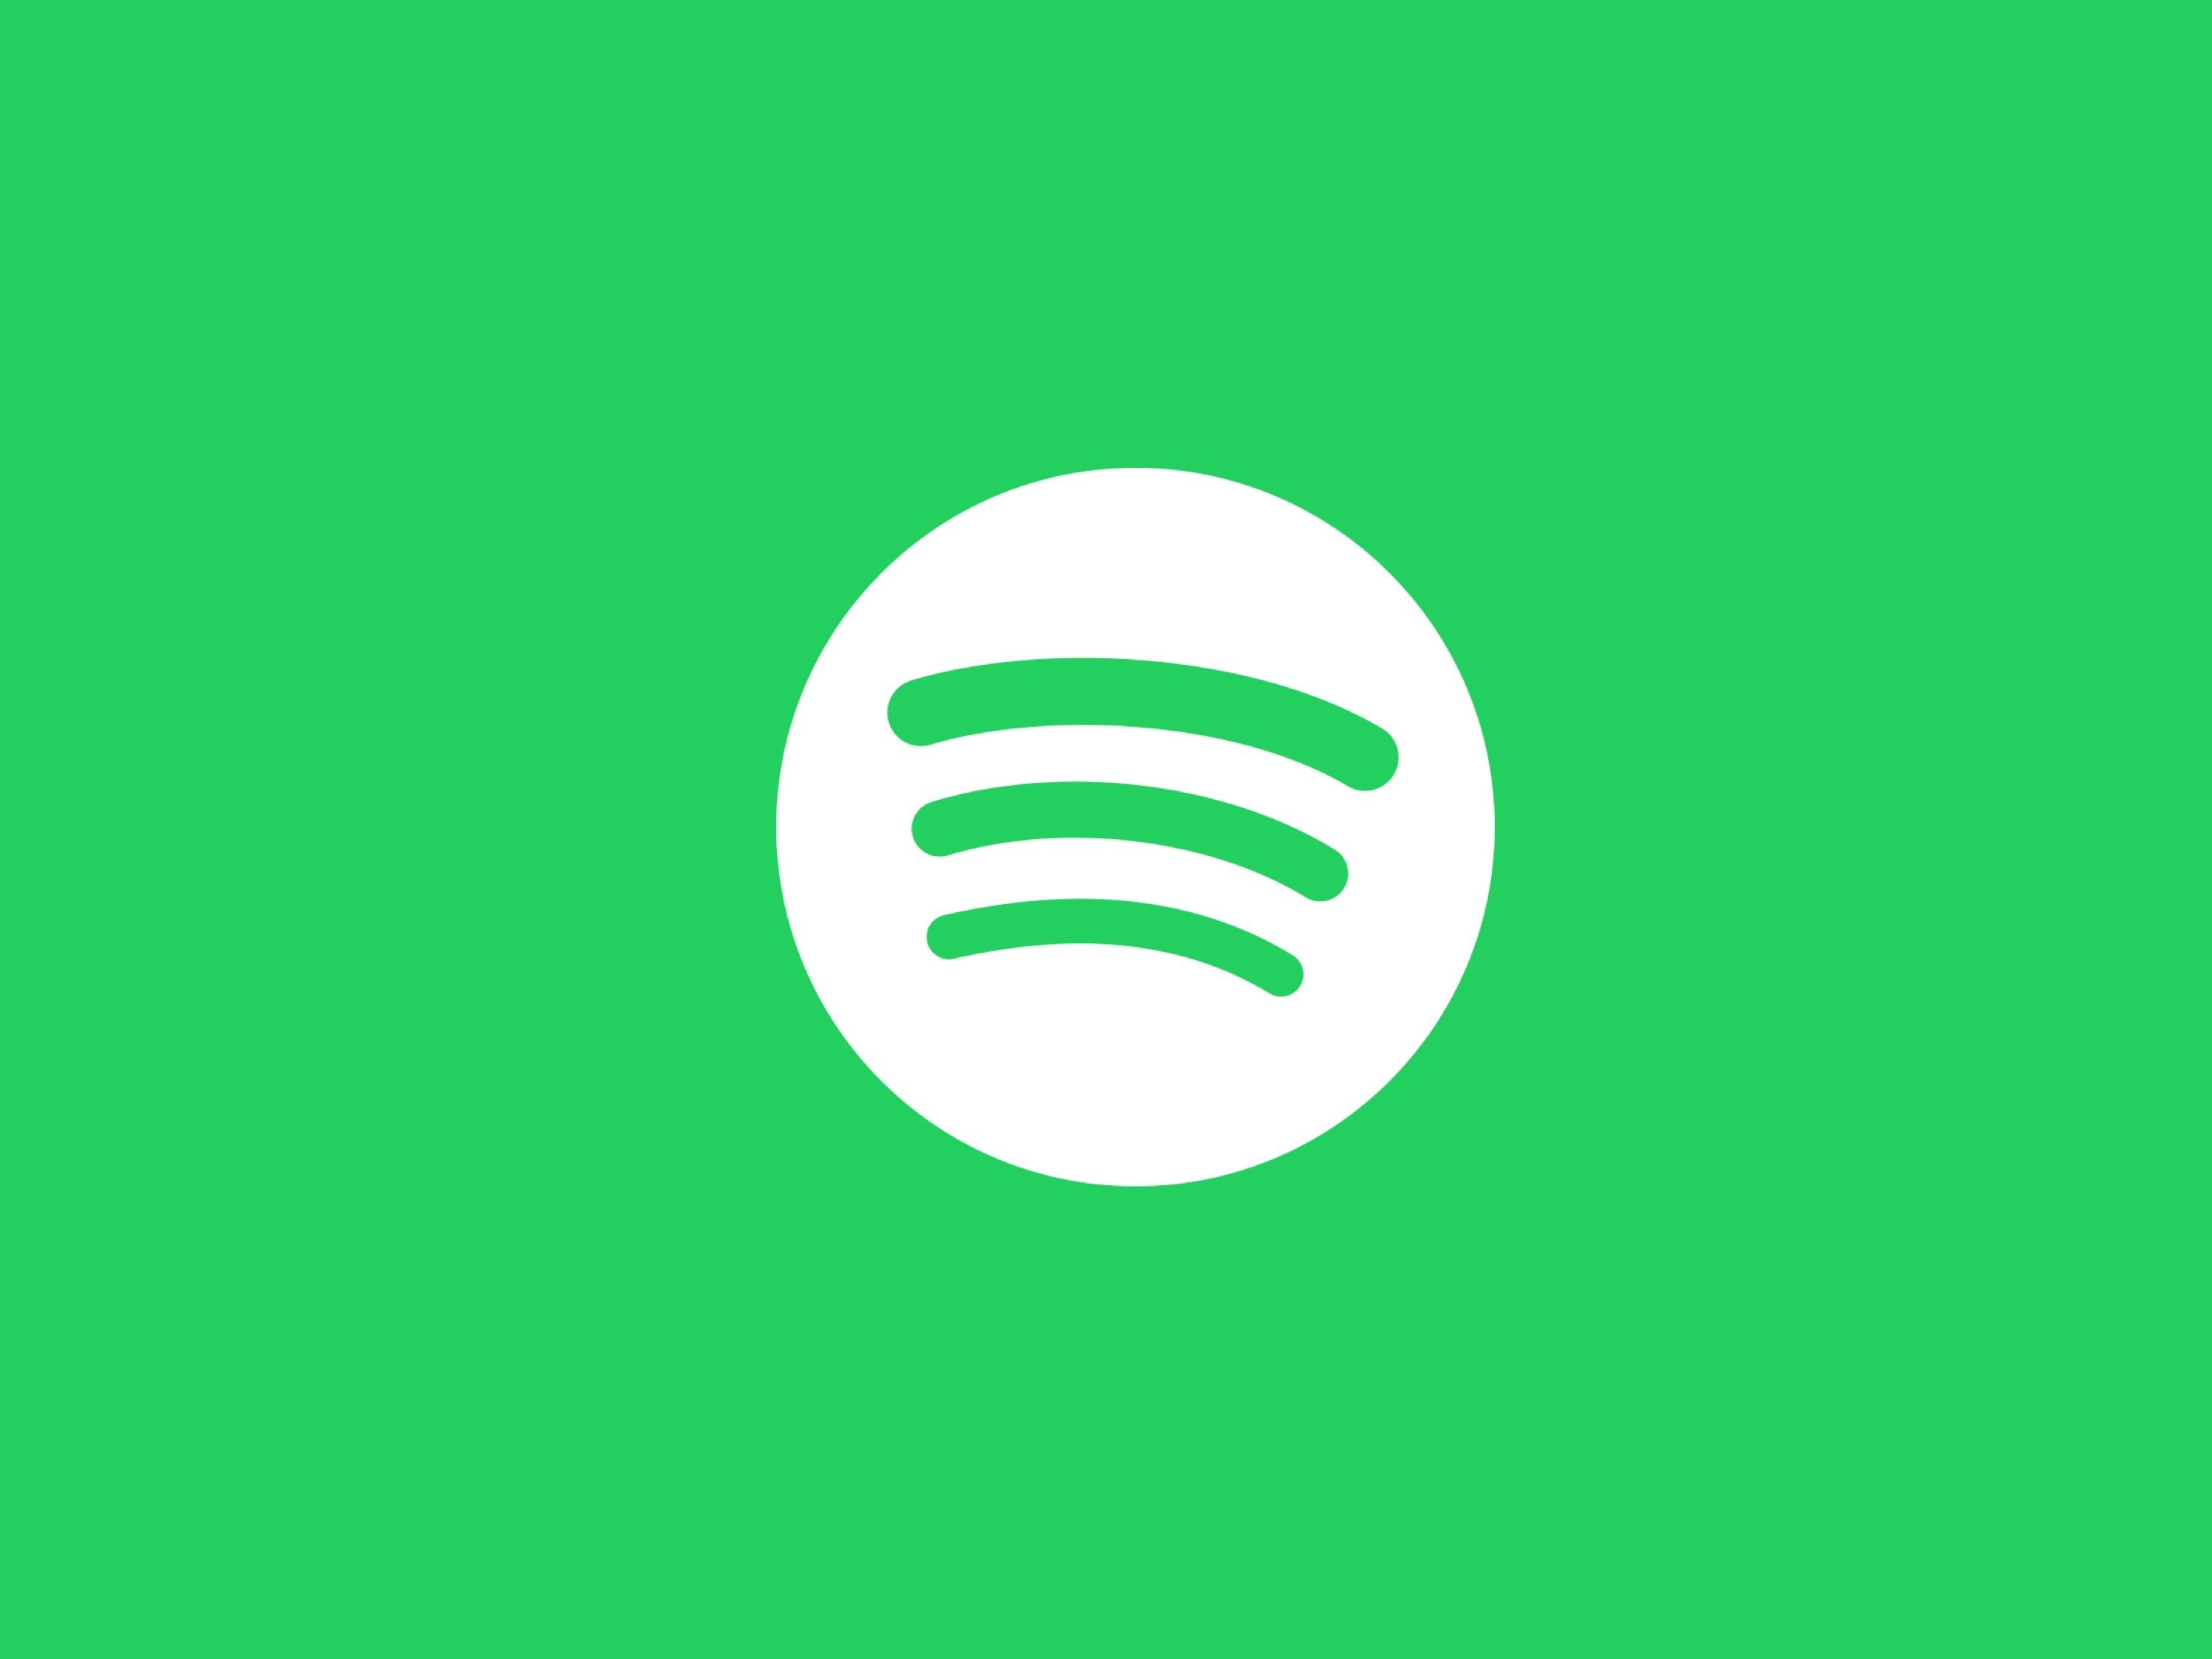 A green background with the logo for spotify - Spotify